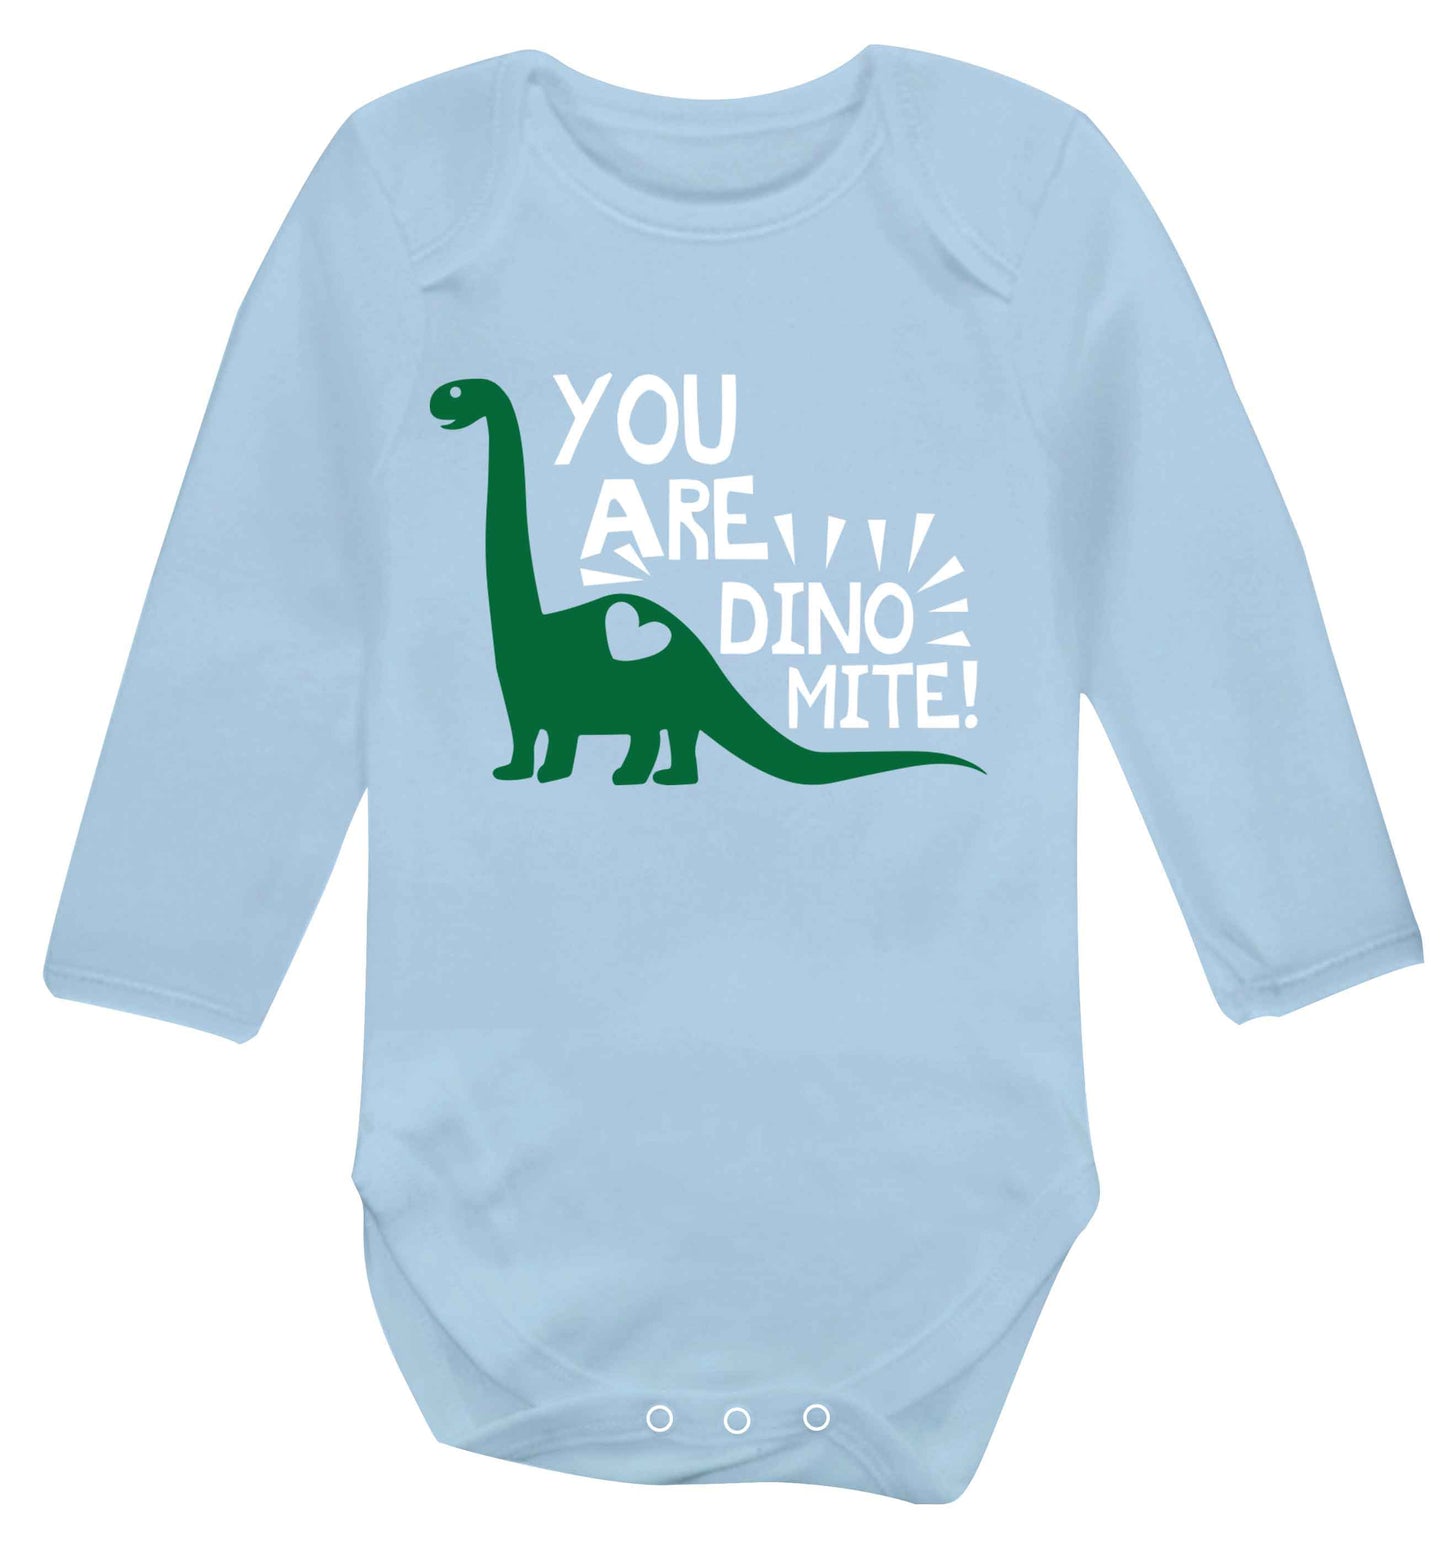 You are dinomite! Baby Vest long sleeved pale blue 6-12 months